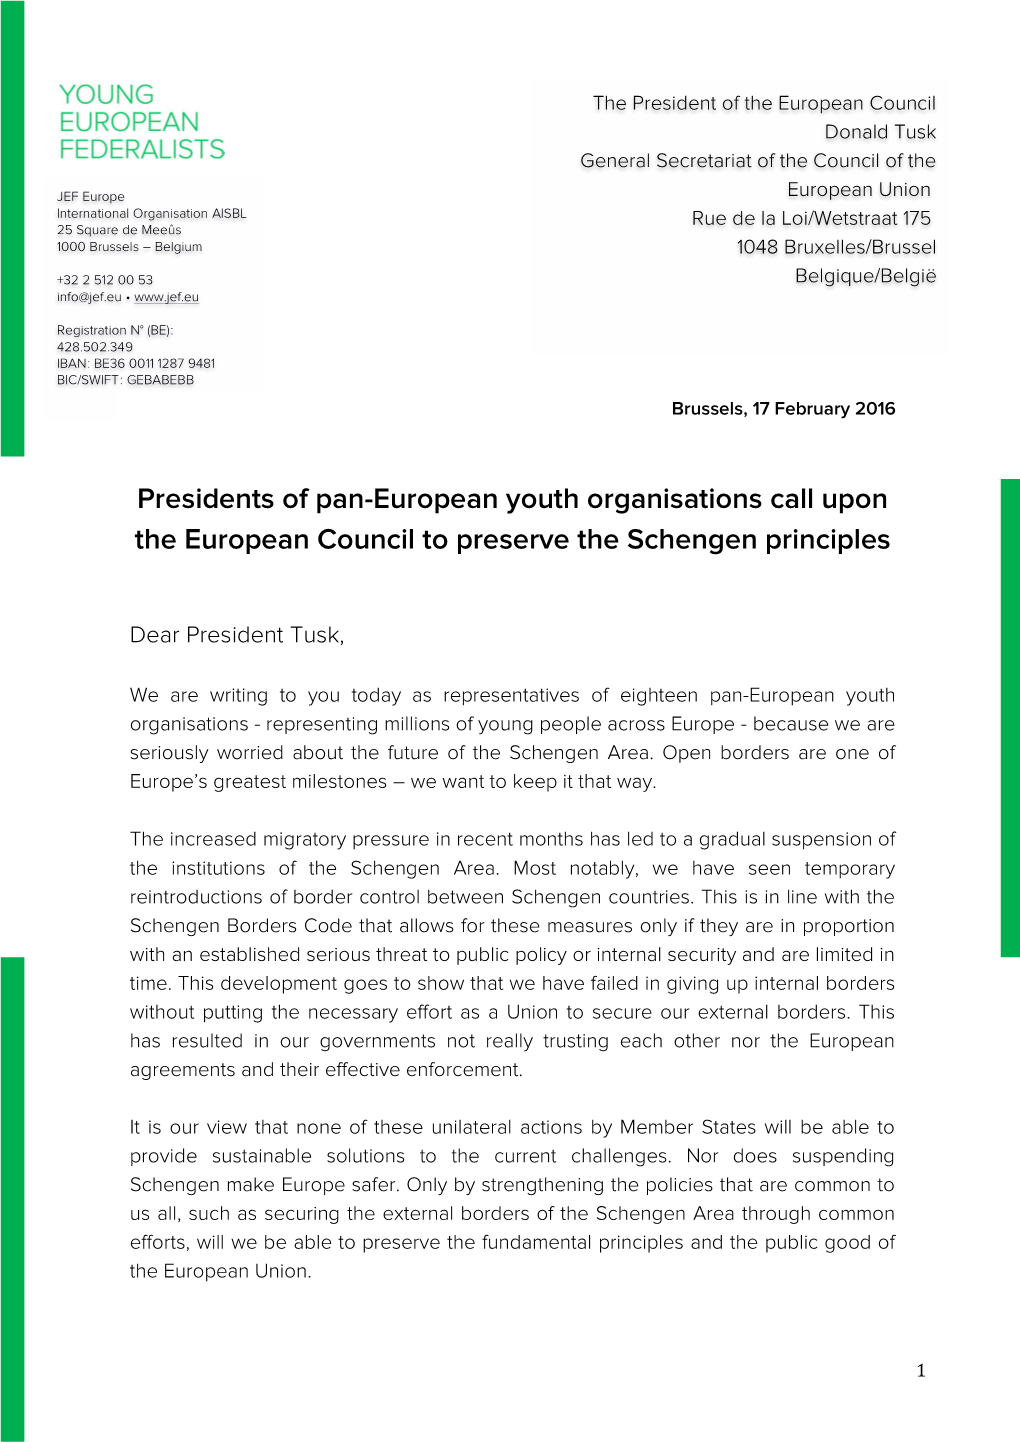 Presidents of Pan-European Youth Organisations Call Upon The